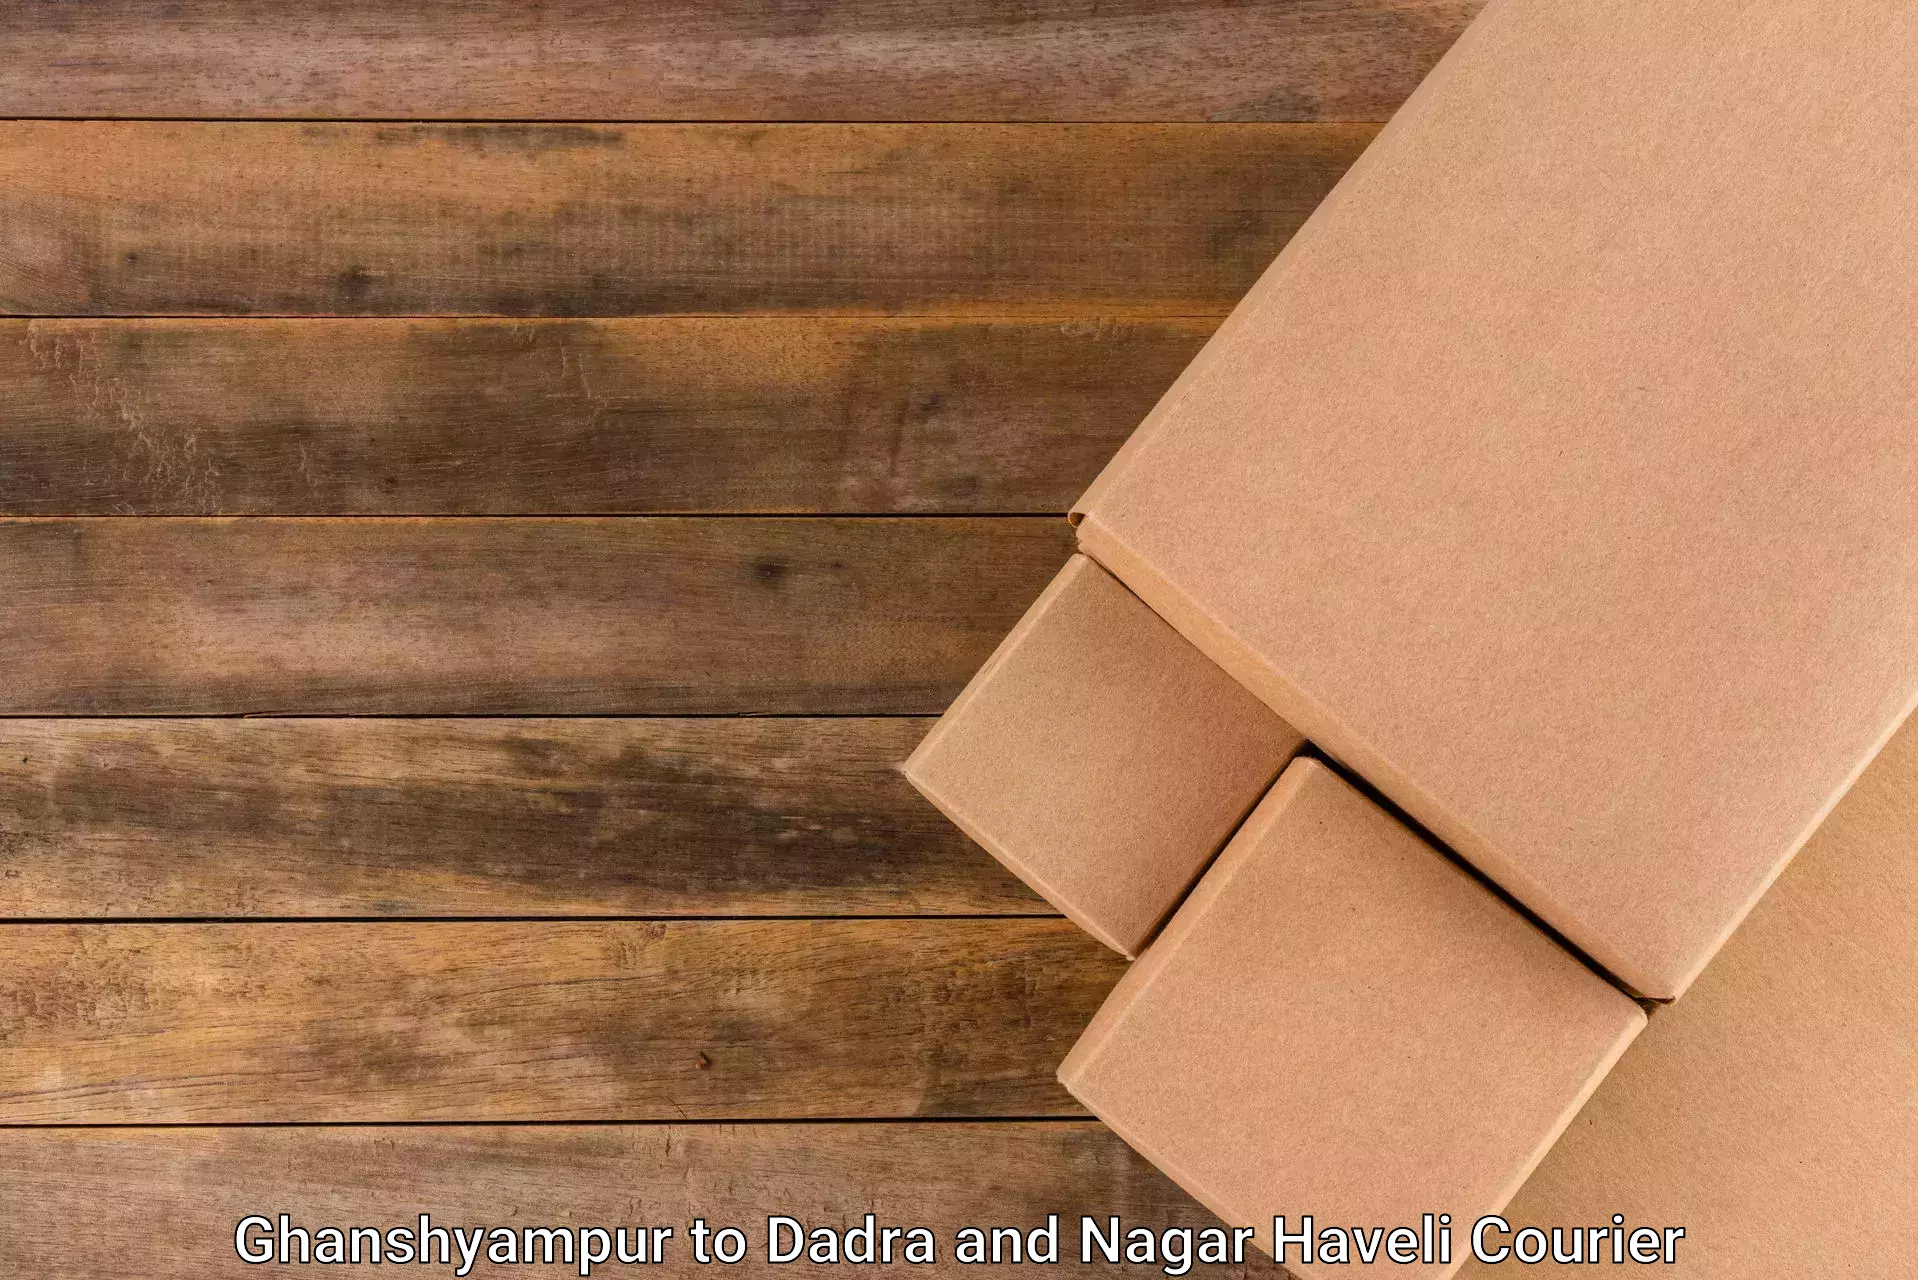 Quality courier services in Ghanshyampur to Dadra and Nagar Haveli